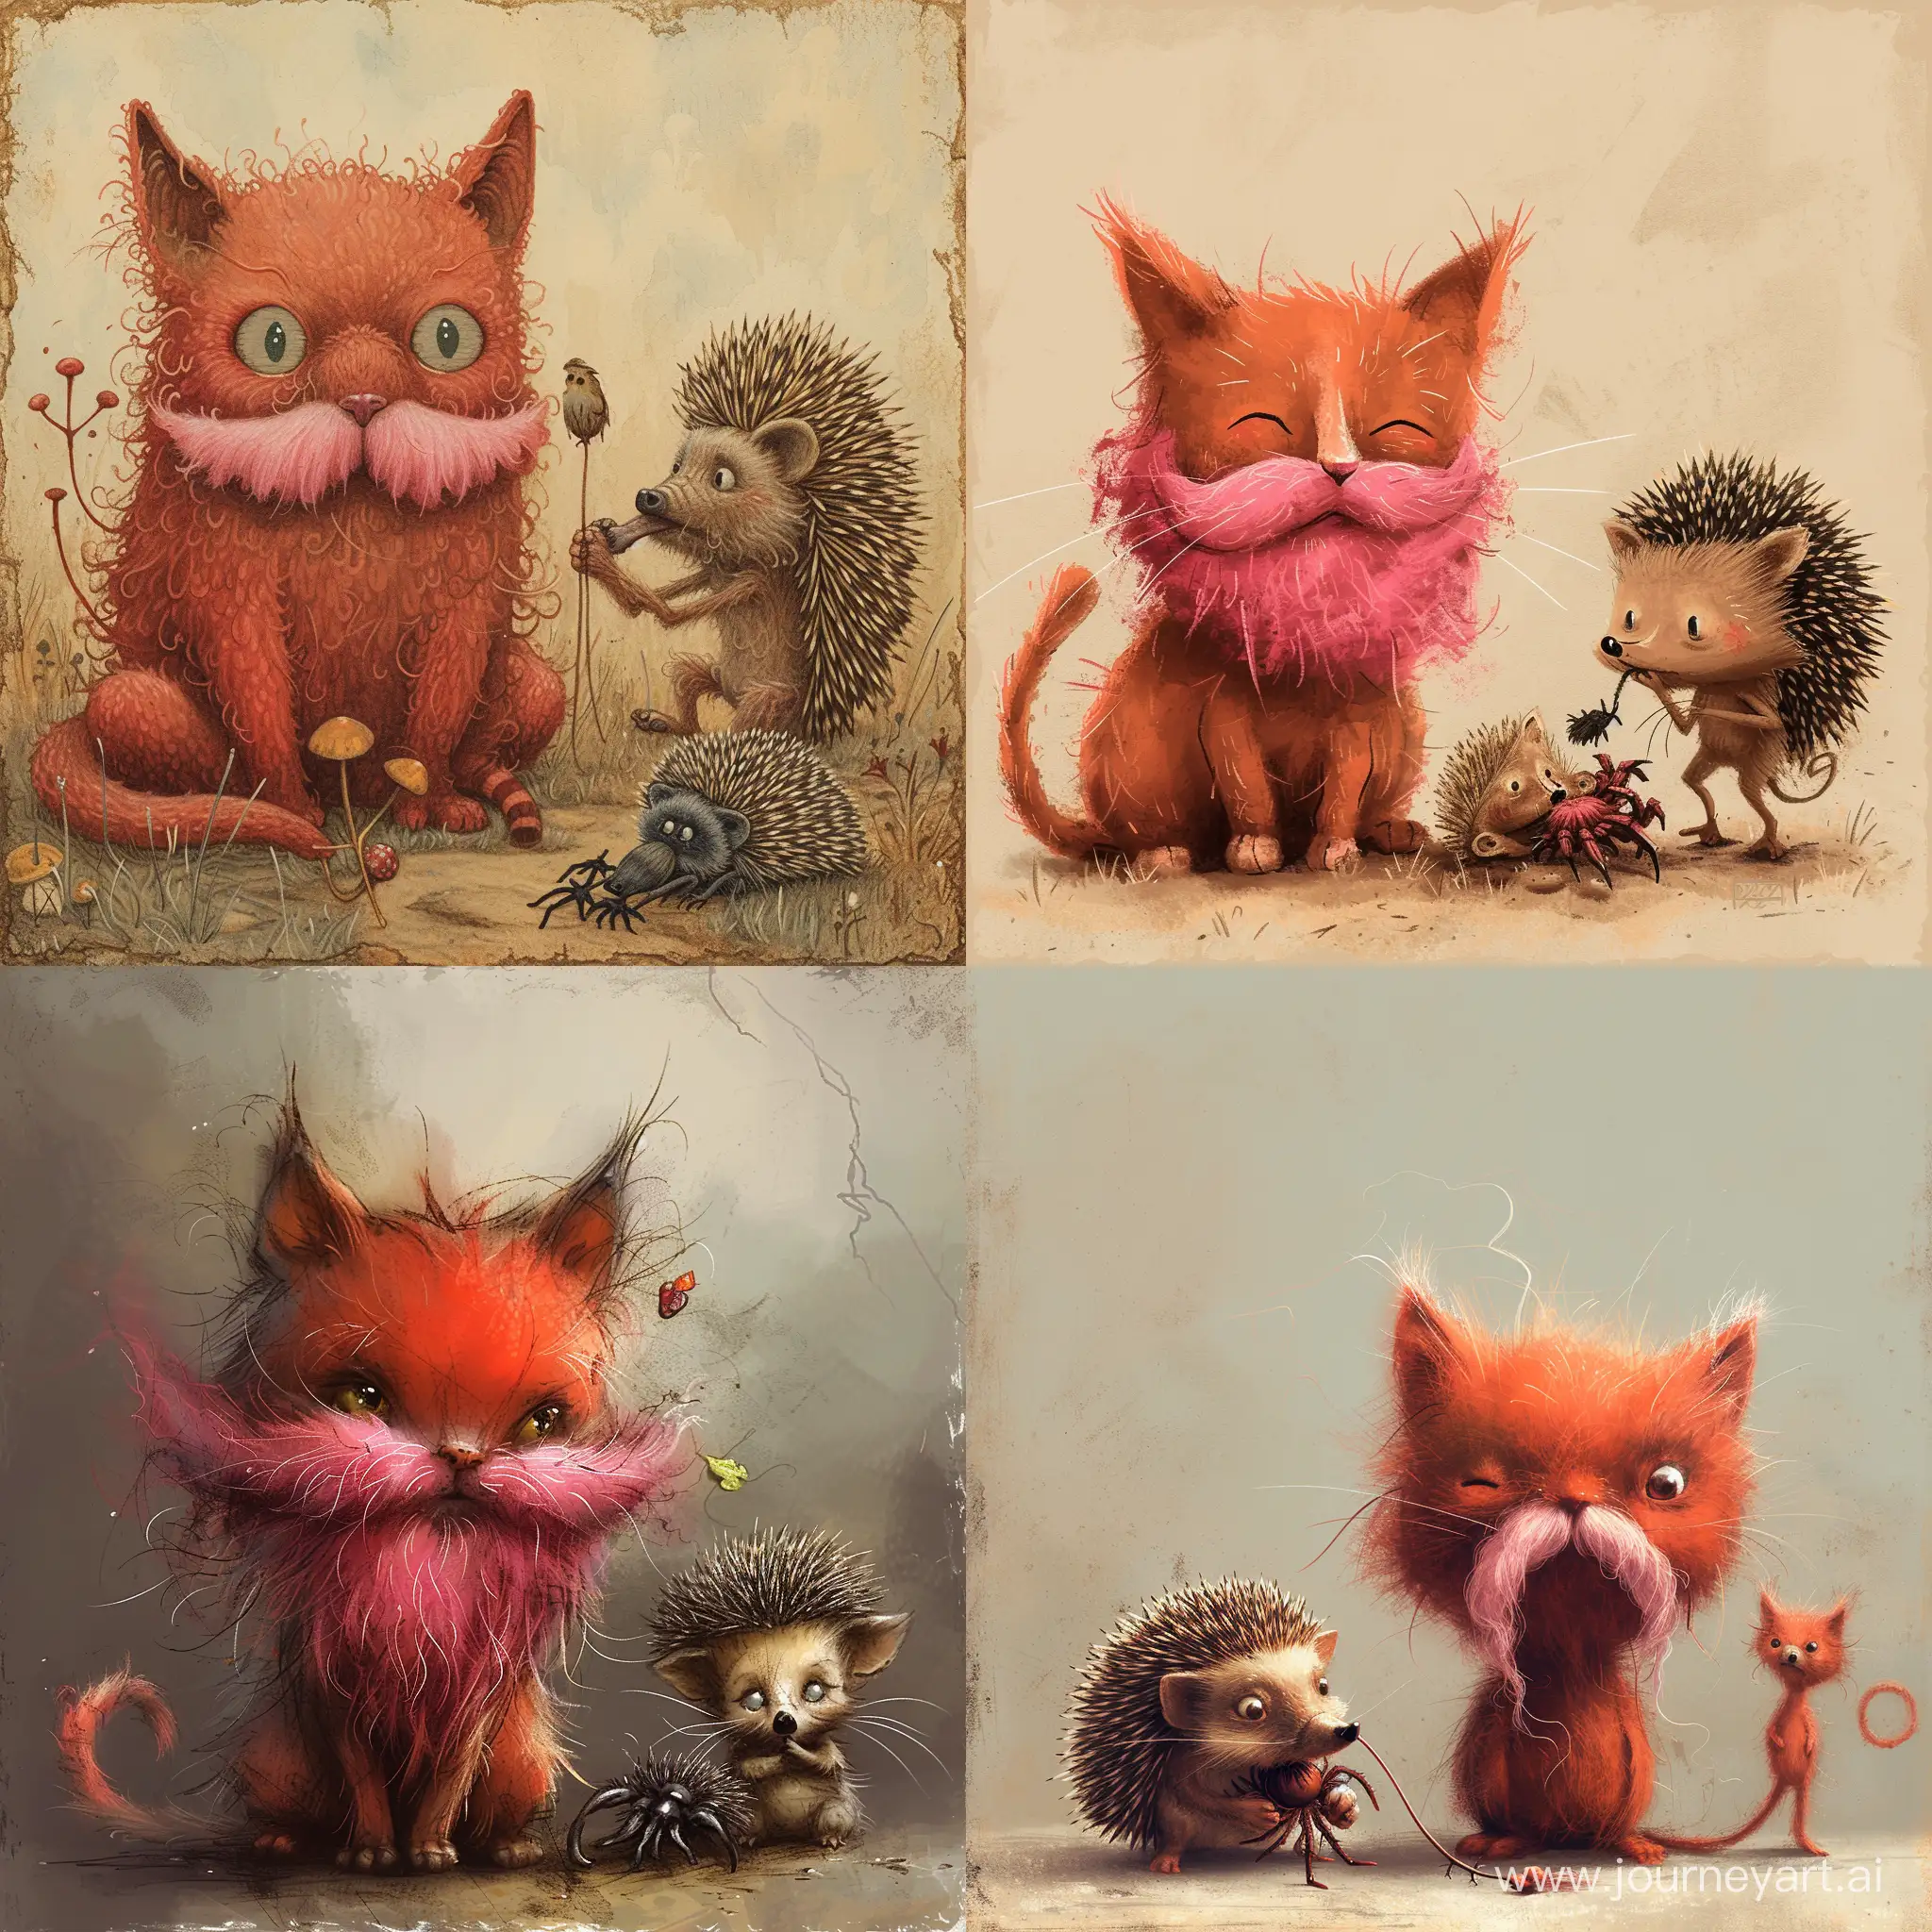 Adorable-Red-Cat-with-Pink-Beard-and-Fluffy-Tail-Beside-Hedgehog-and-Tarantula